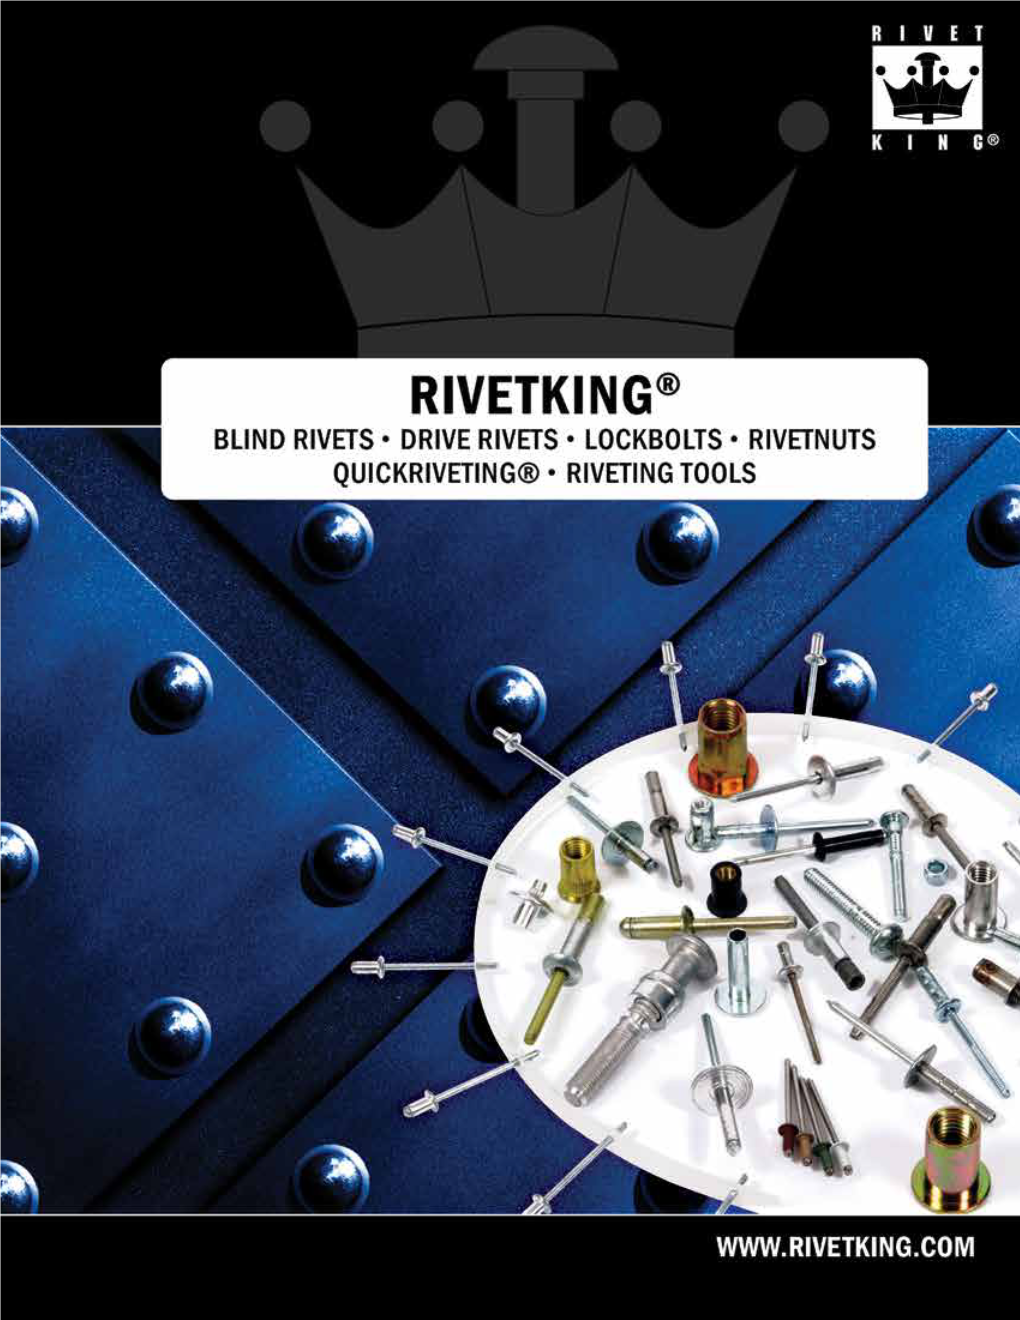 Rivetking® Locations & Table of Contents